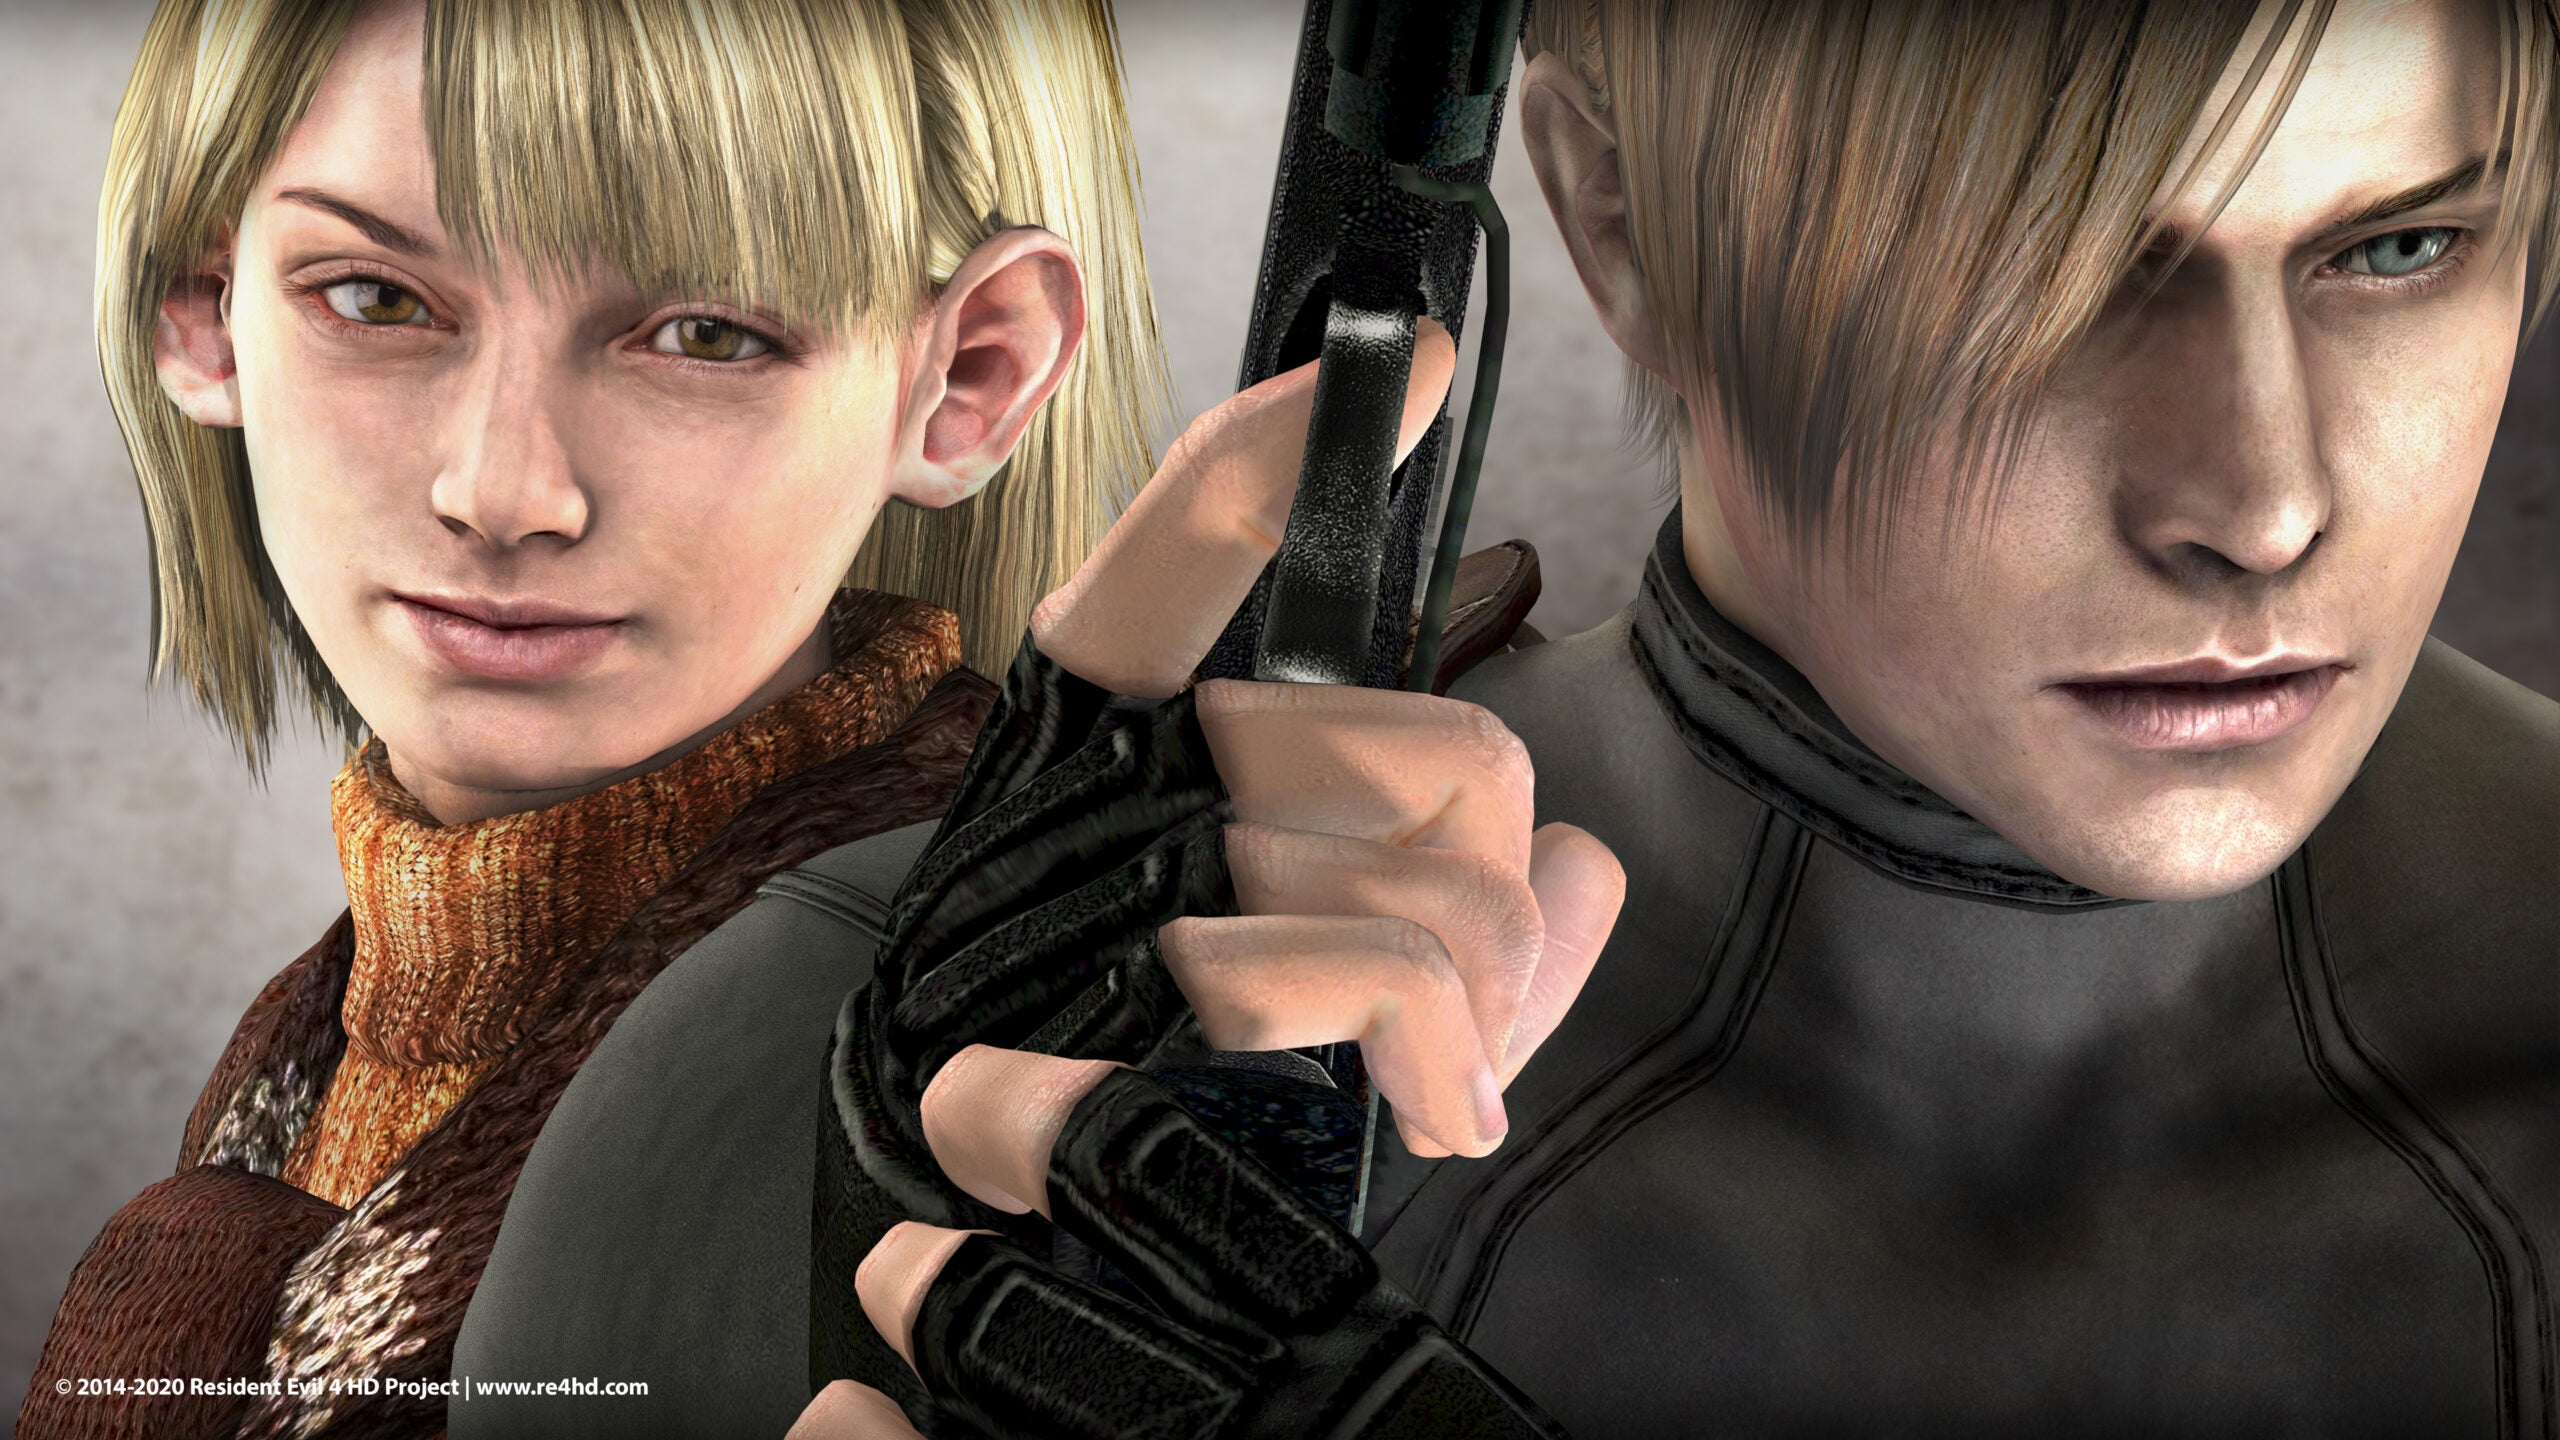 Ashley and Leon in wallpaper for the Resident Evil 4 HD Project mod.